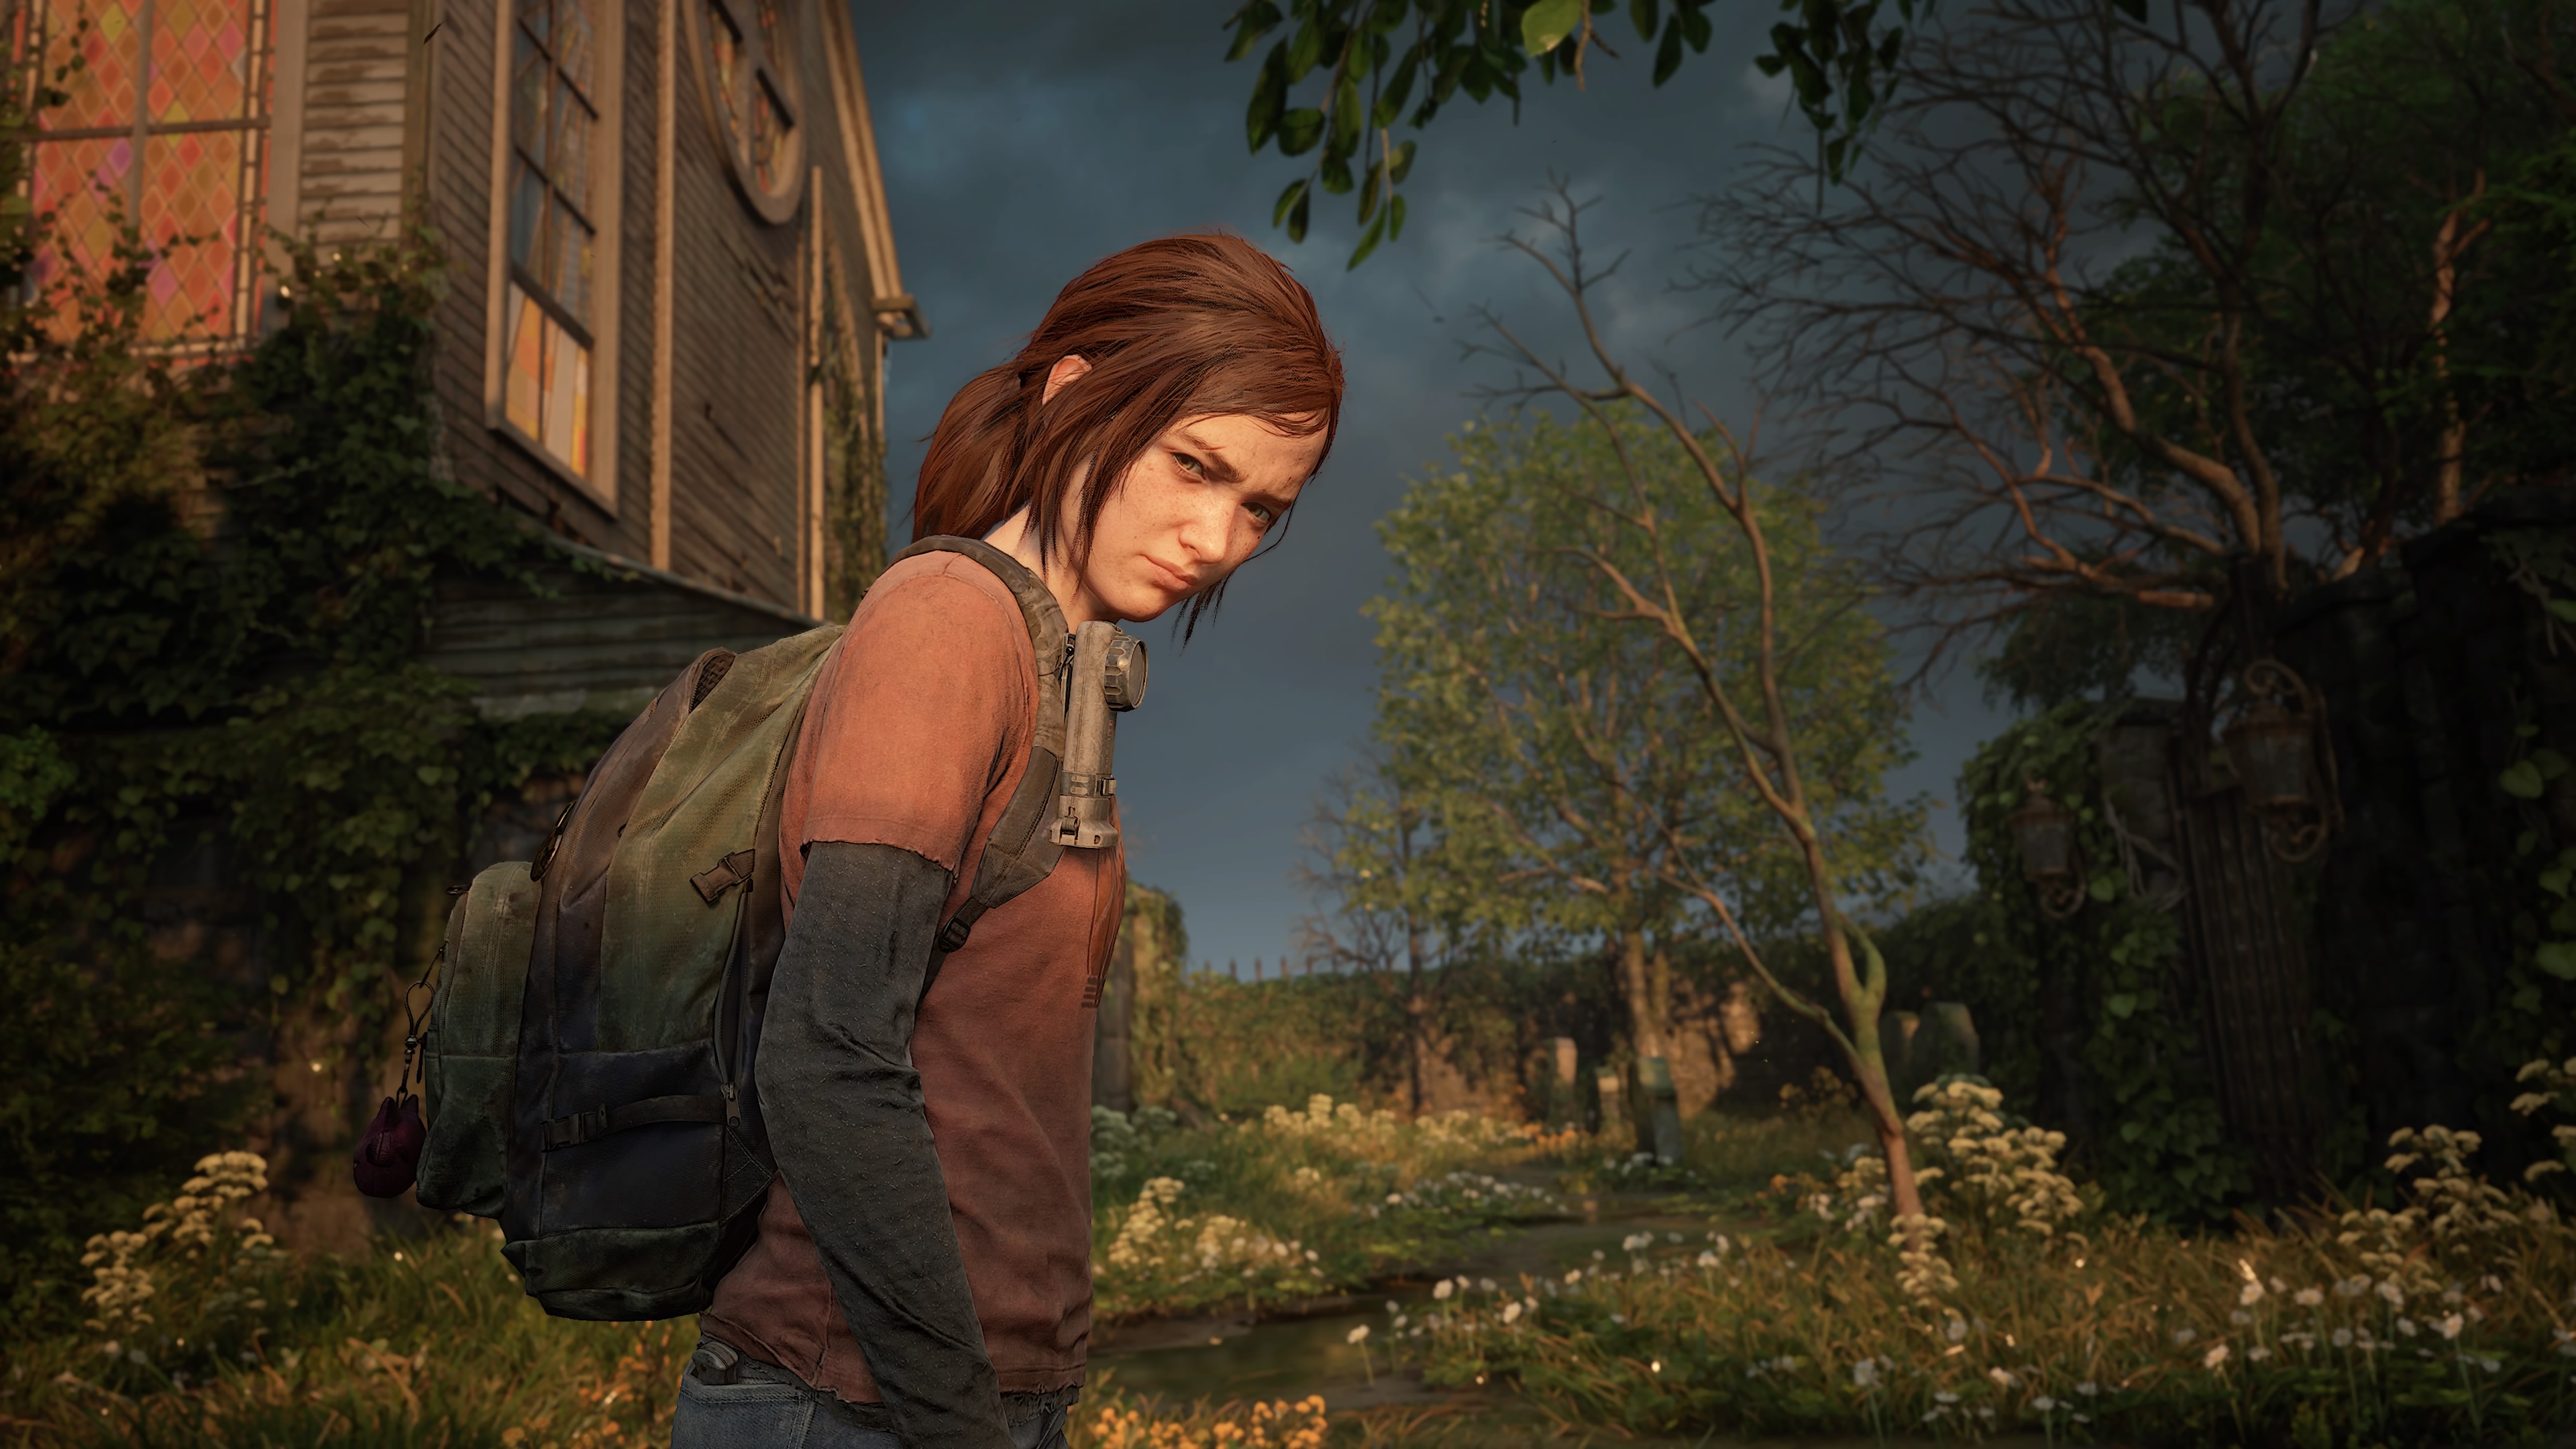 General 3840x2160 The Last of Us Ellie Williams Playstation 5 video game art screen shot Naughty Dog video games video game characters